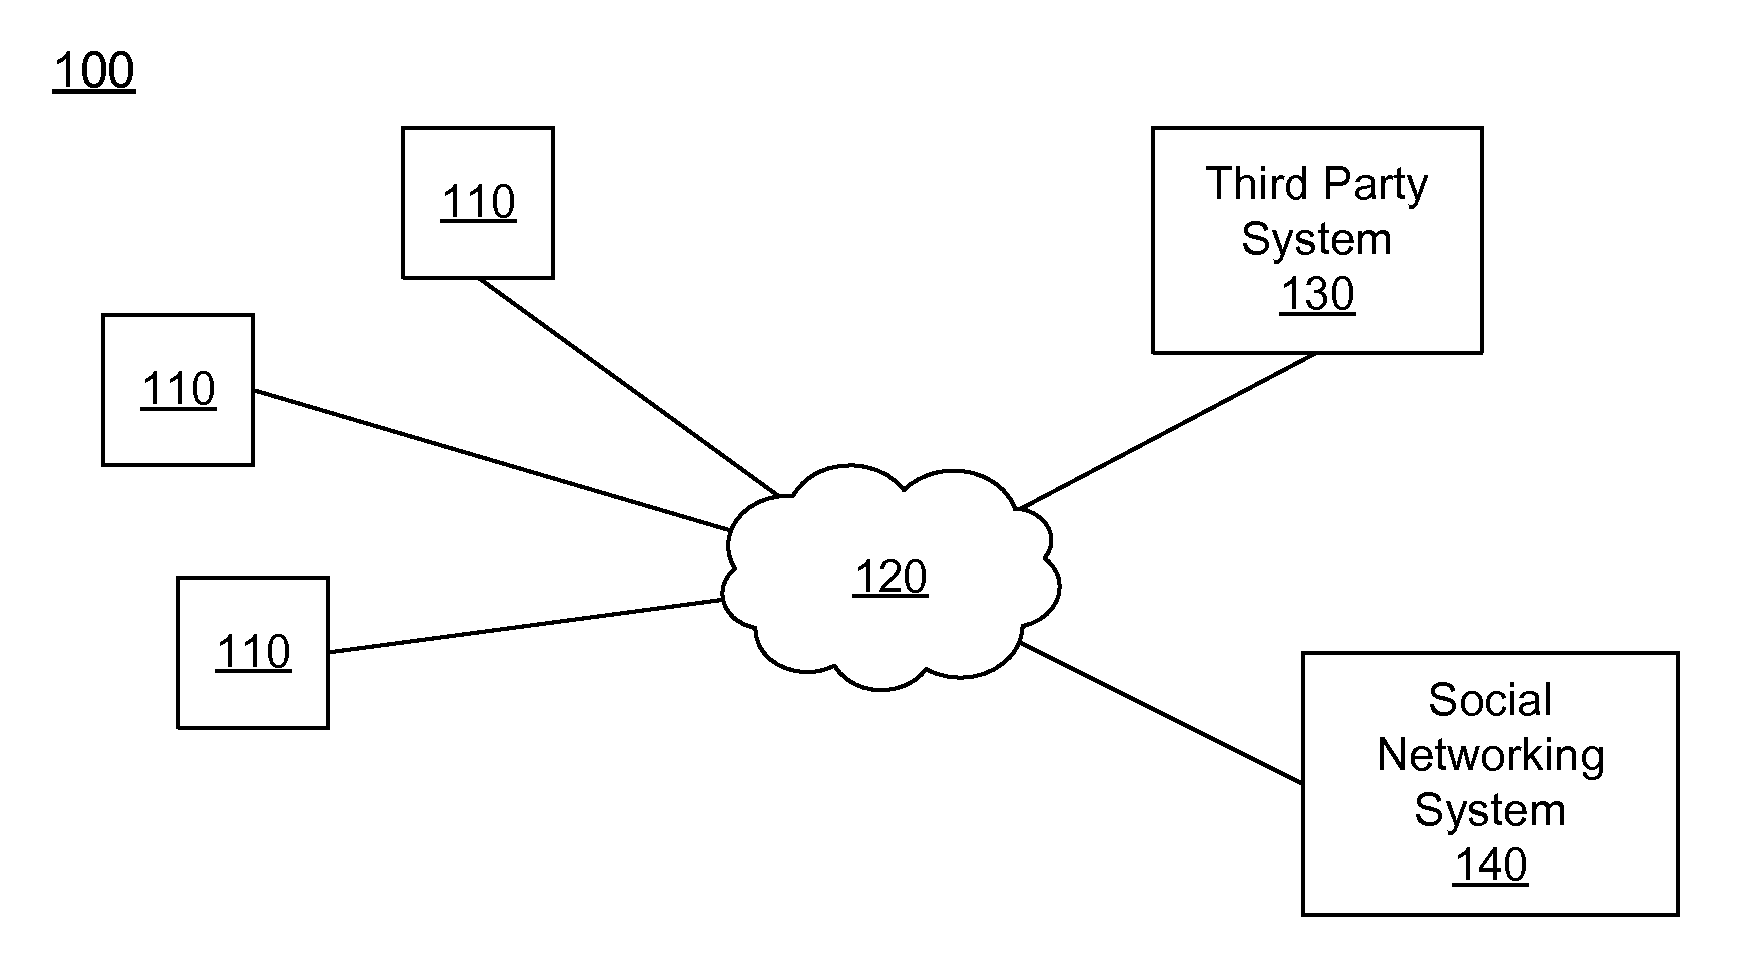 Inferring relationship statuses of users of a social networking system  - US-2015356180-A1